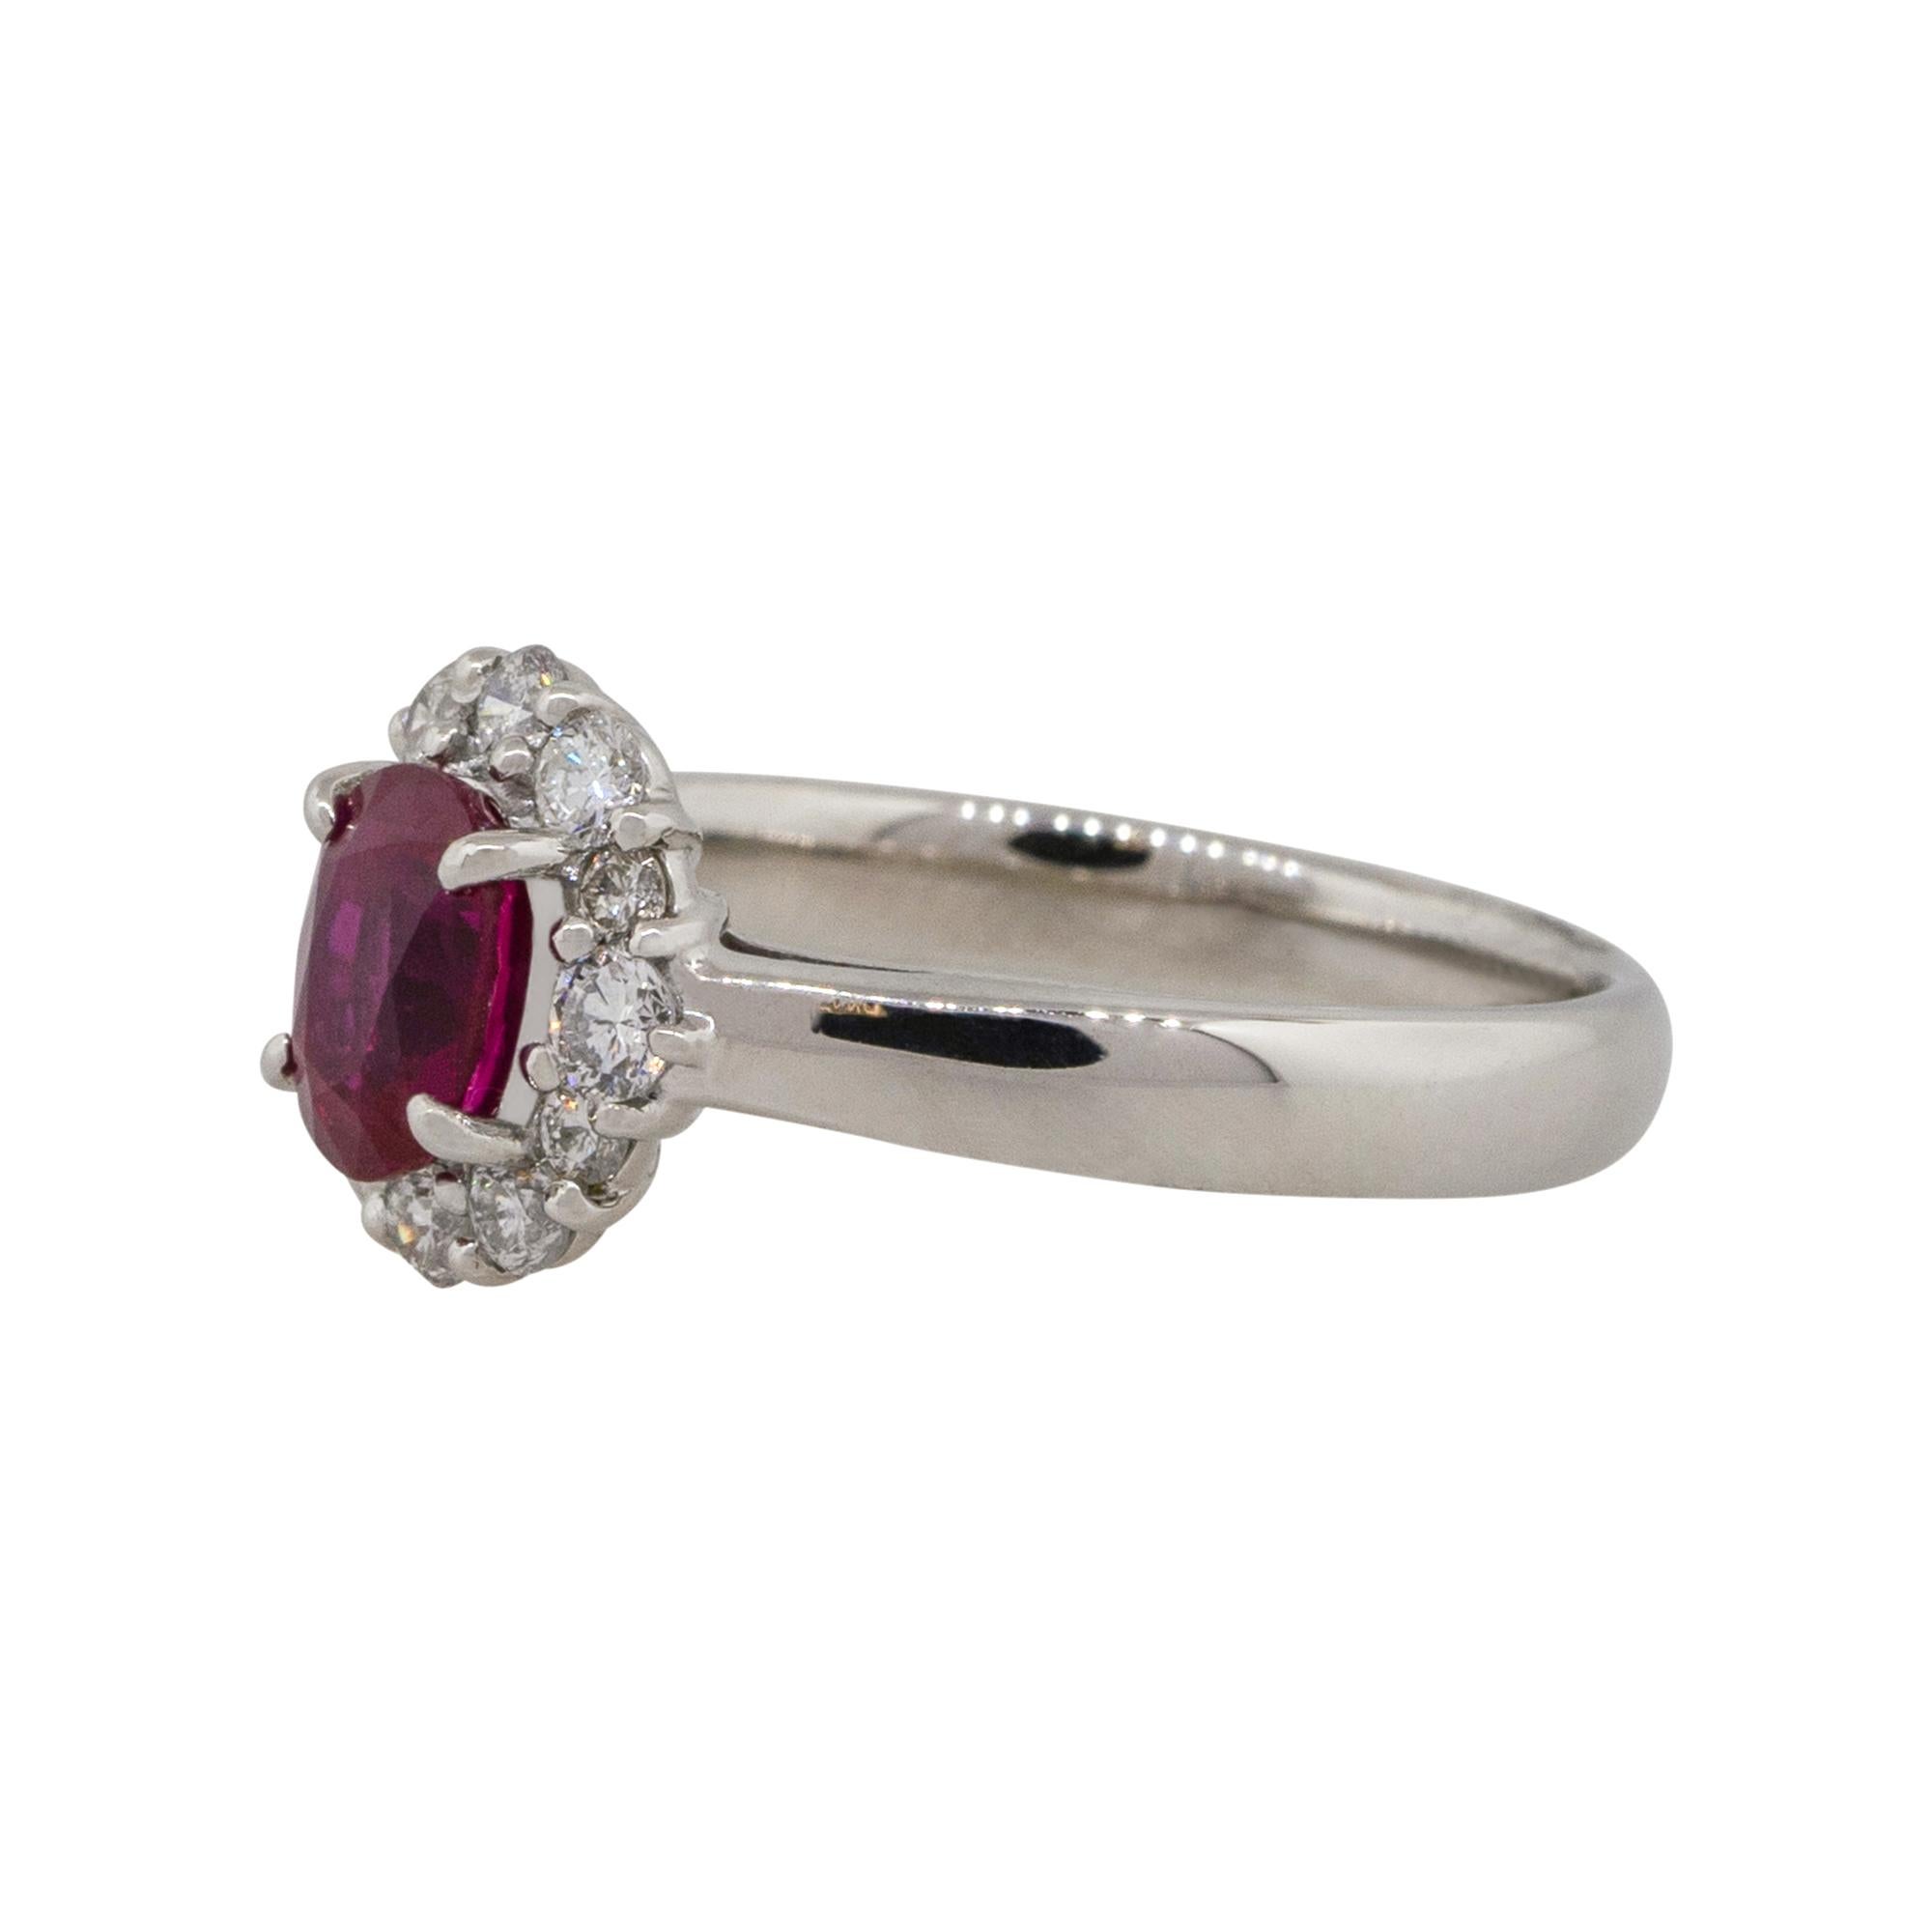 Material: Platinum
Gemstone details: Approx. 1.12ctw oval shaped Ruby center gemstone
Diamond details: Approx. 0.41ctw of round and baguette cut Diamonds. Diamonds are G/H in color and VS in clarity
Ring Size: 6.25 
Ring Measurements: 0.75